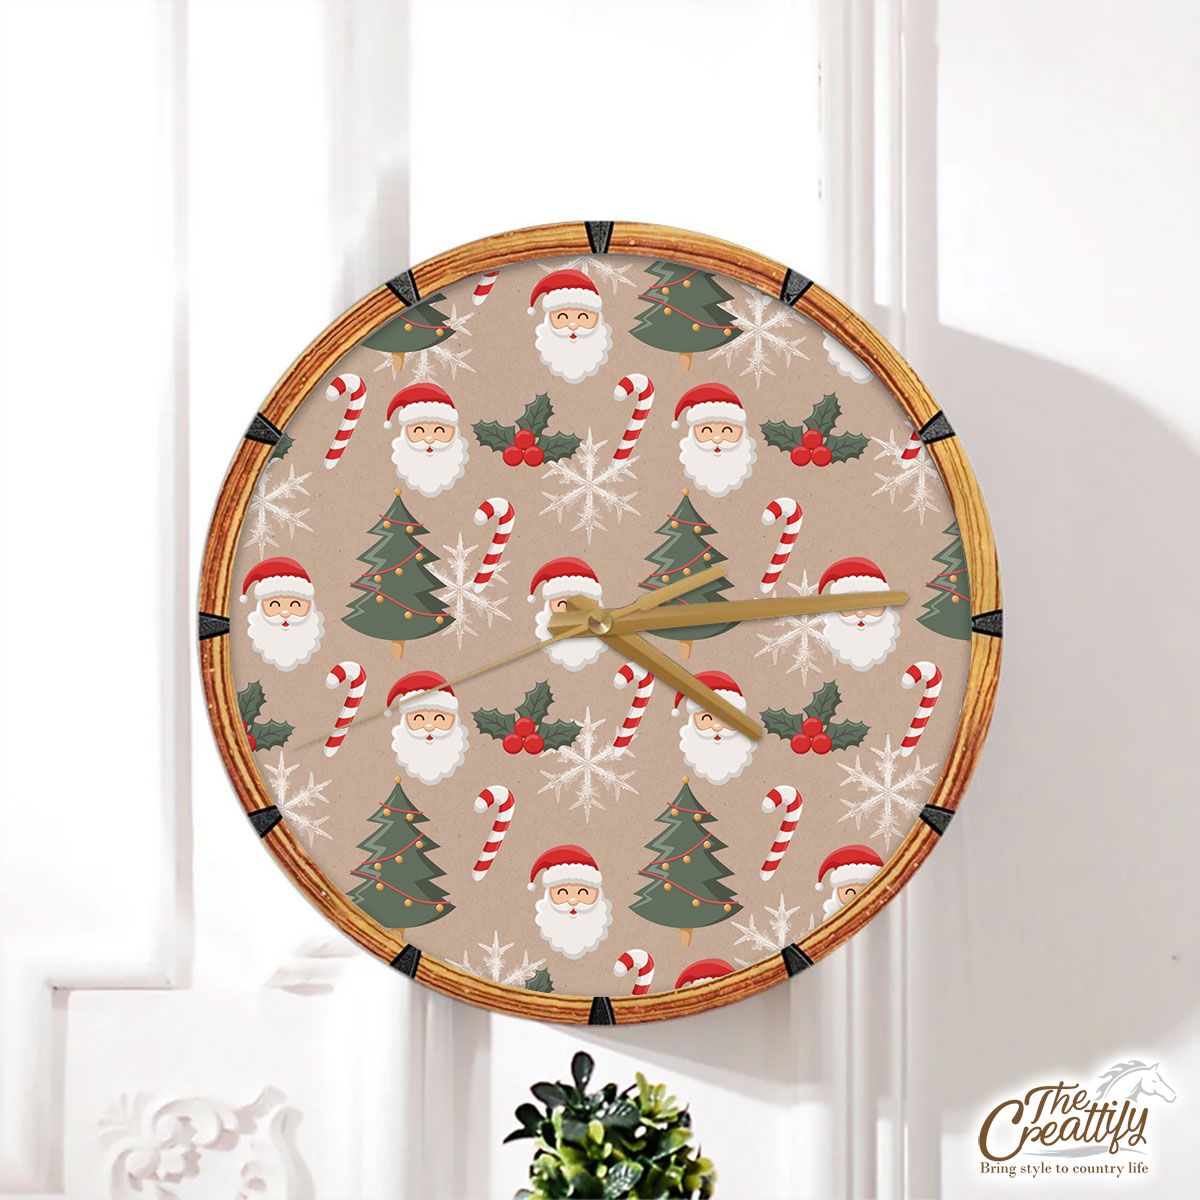 Santa Clause, Christmas Tree, Candy Cane, Holly Leaf On Snowflake Background Wall Clock